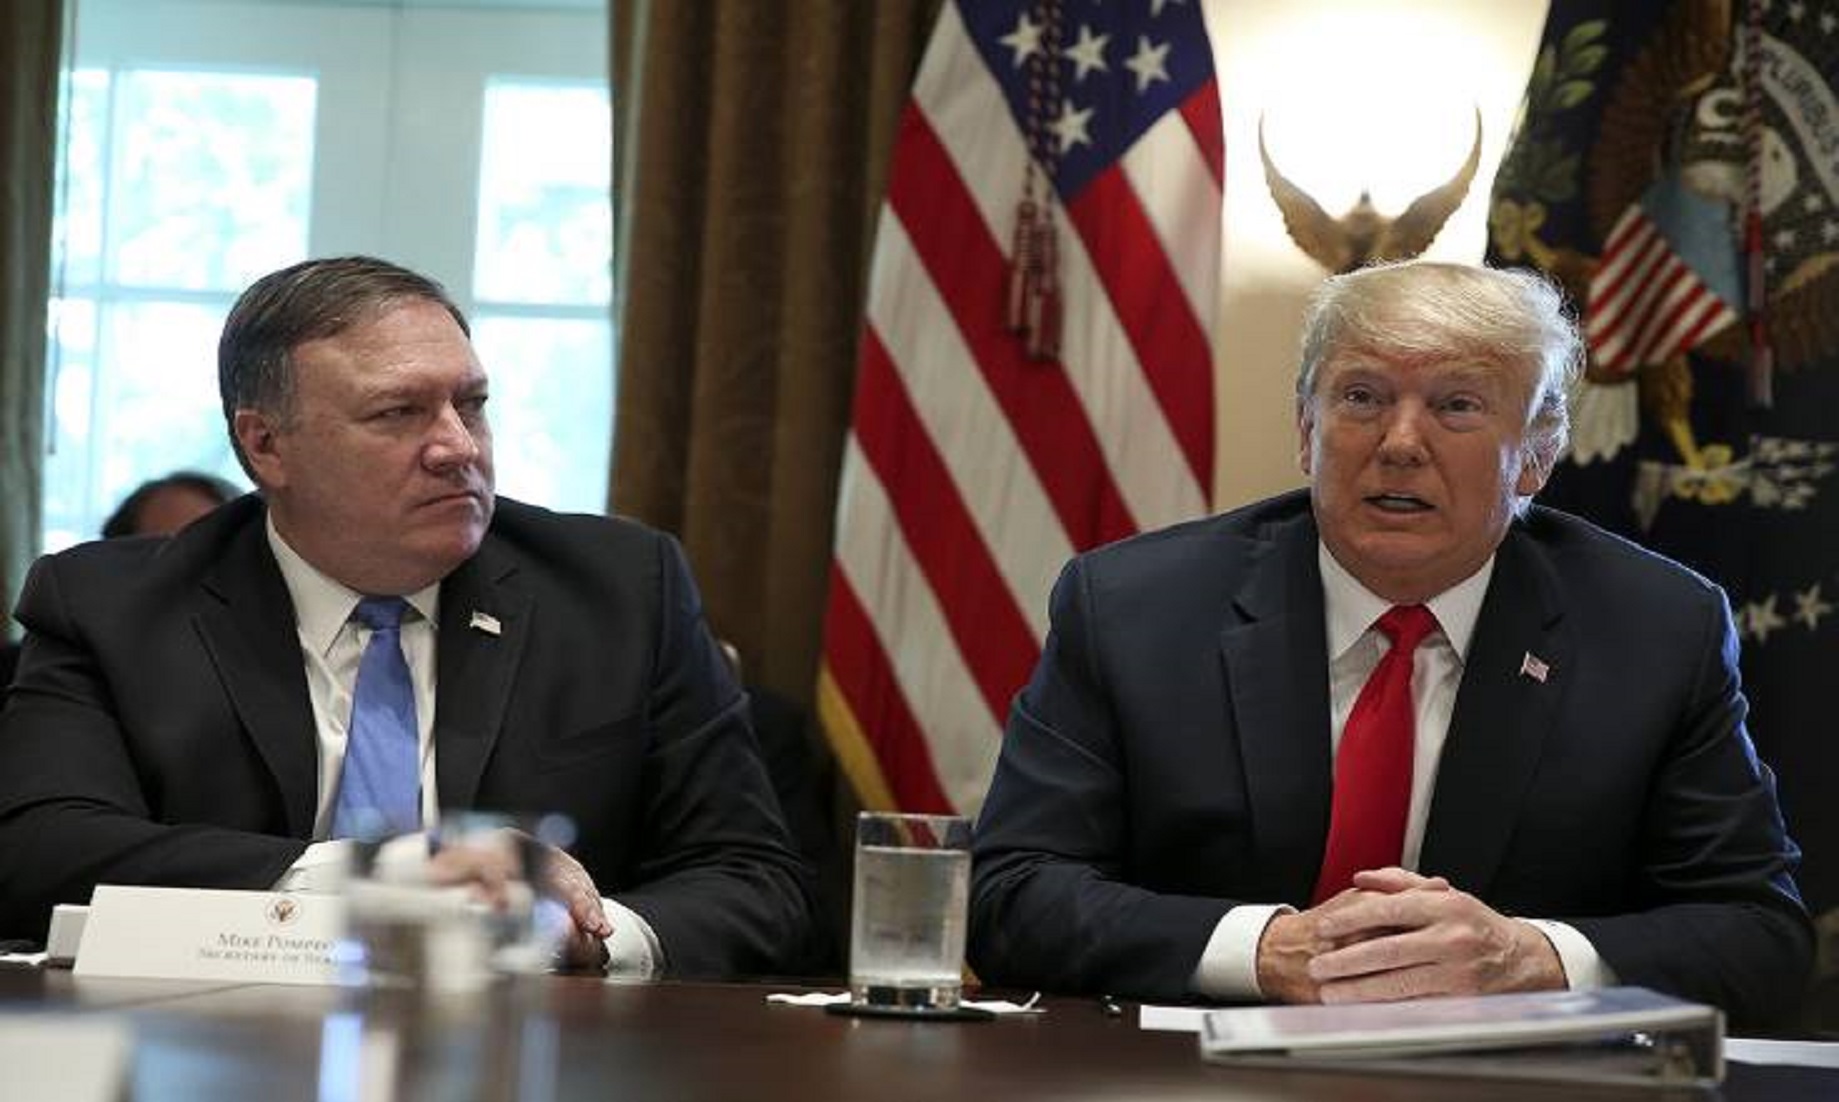 Pompeo Widely Blasted By U.S. Media, Seen As “Worst Secretary Of State Ever”